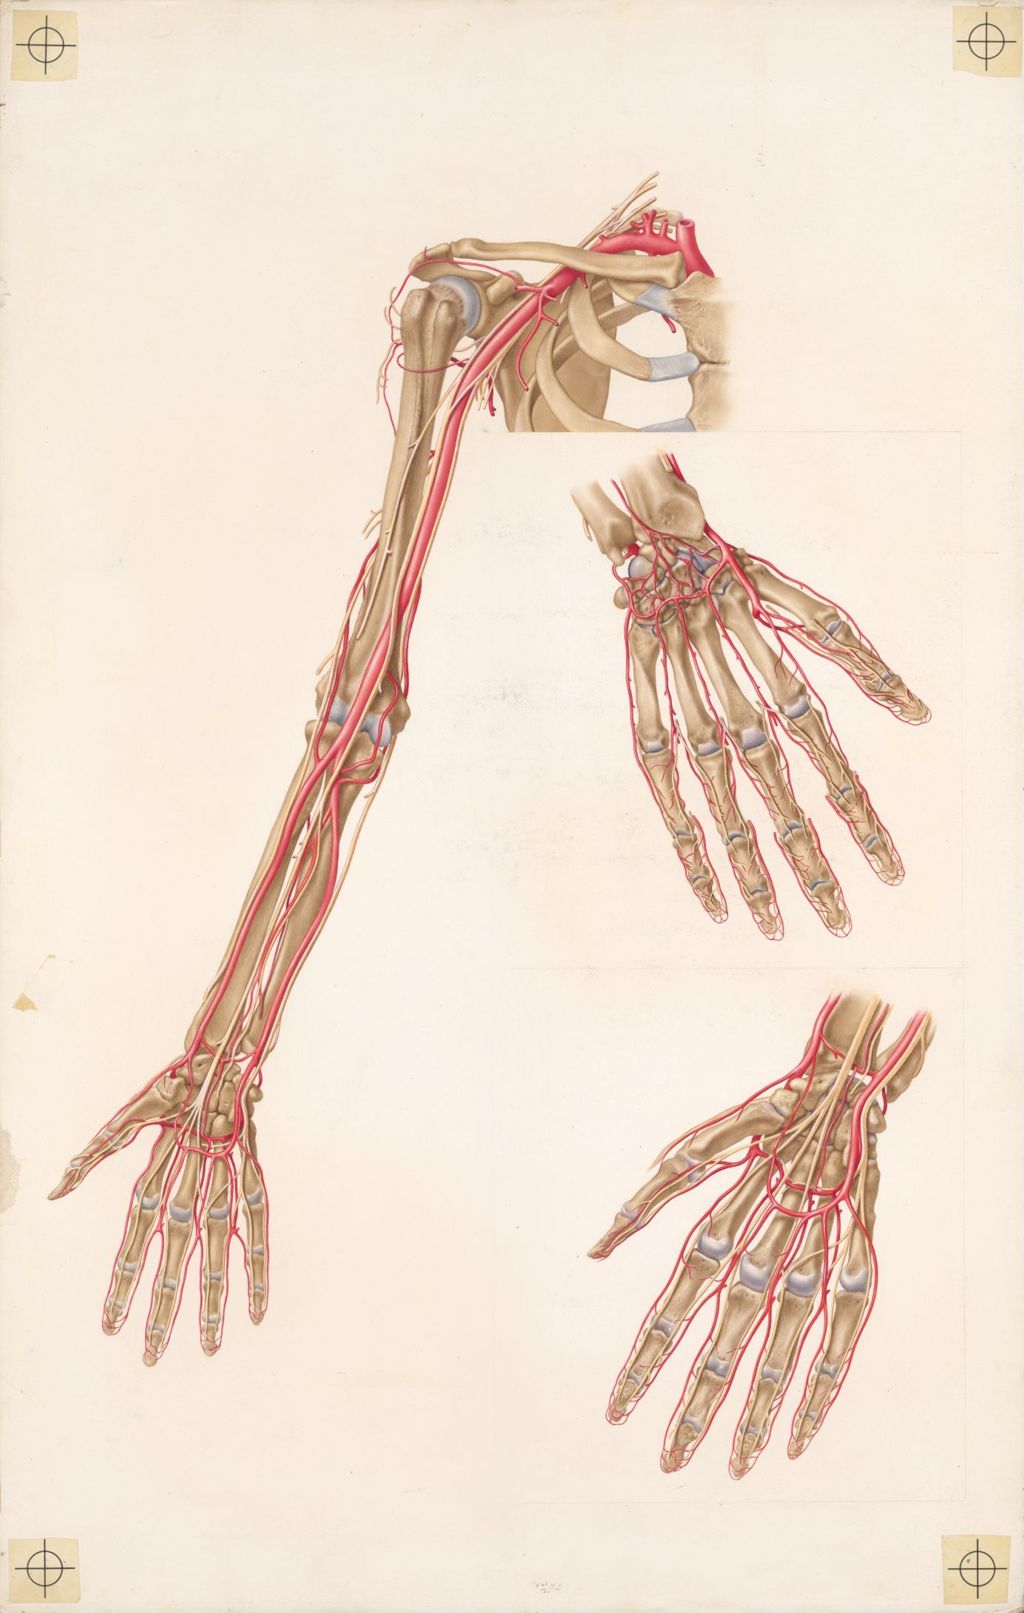 Miniature of Doctor-patient explanatory atlas of anatomy, The blood vessels and nerves of the upper limb